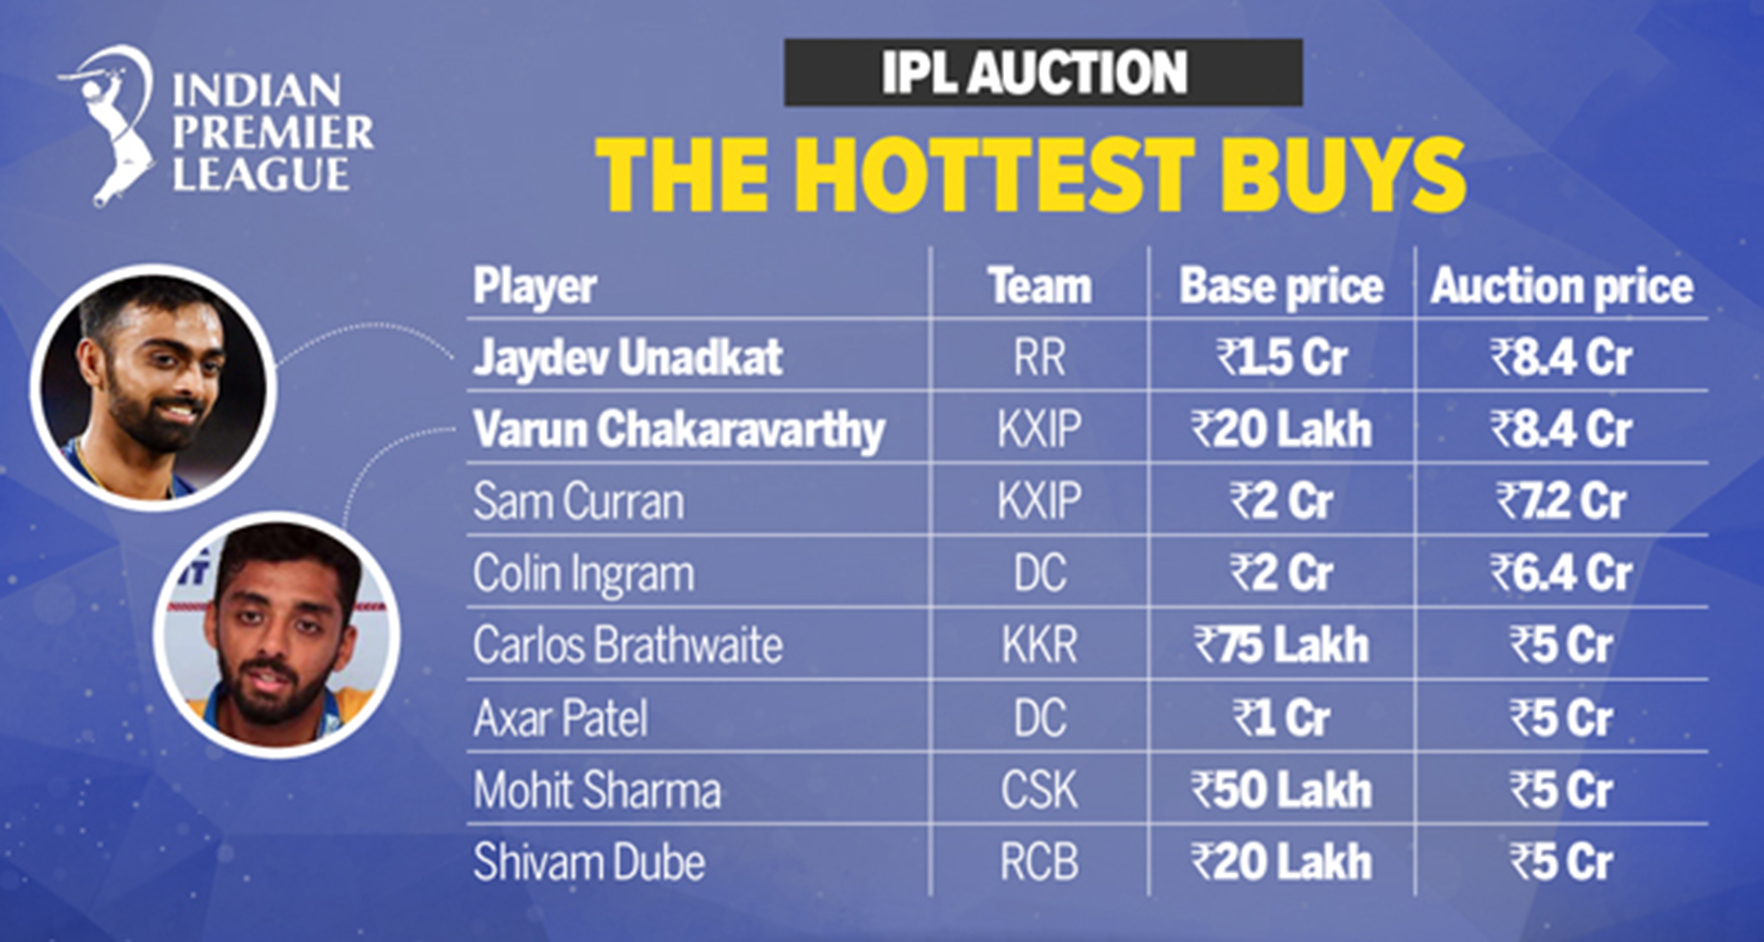 IPL Auction 2019: Top 5 Most Expensive Players of 2019